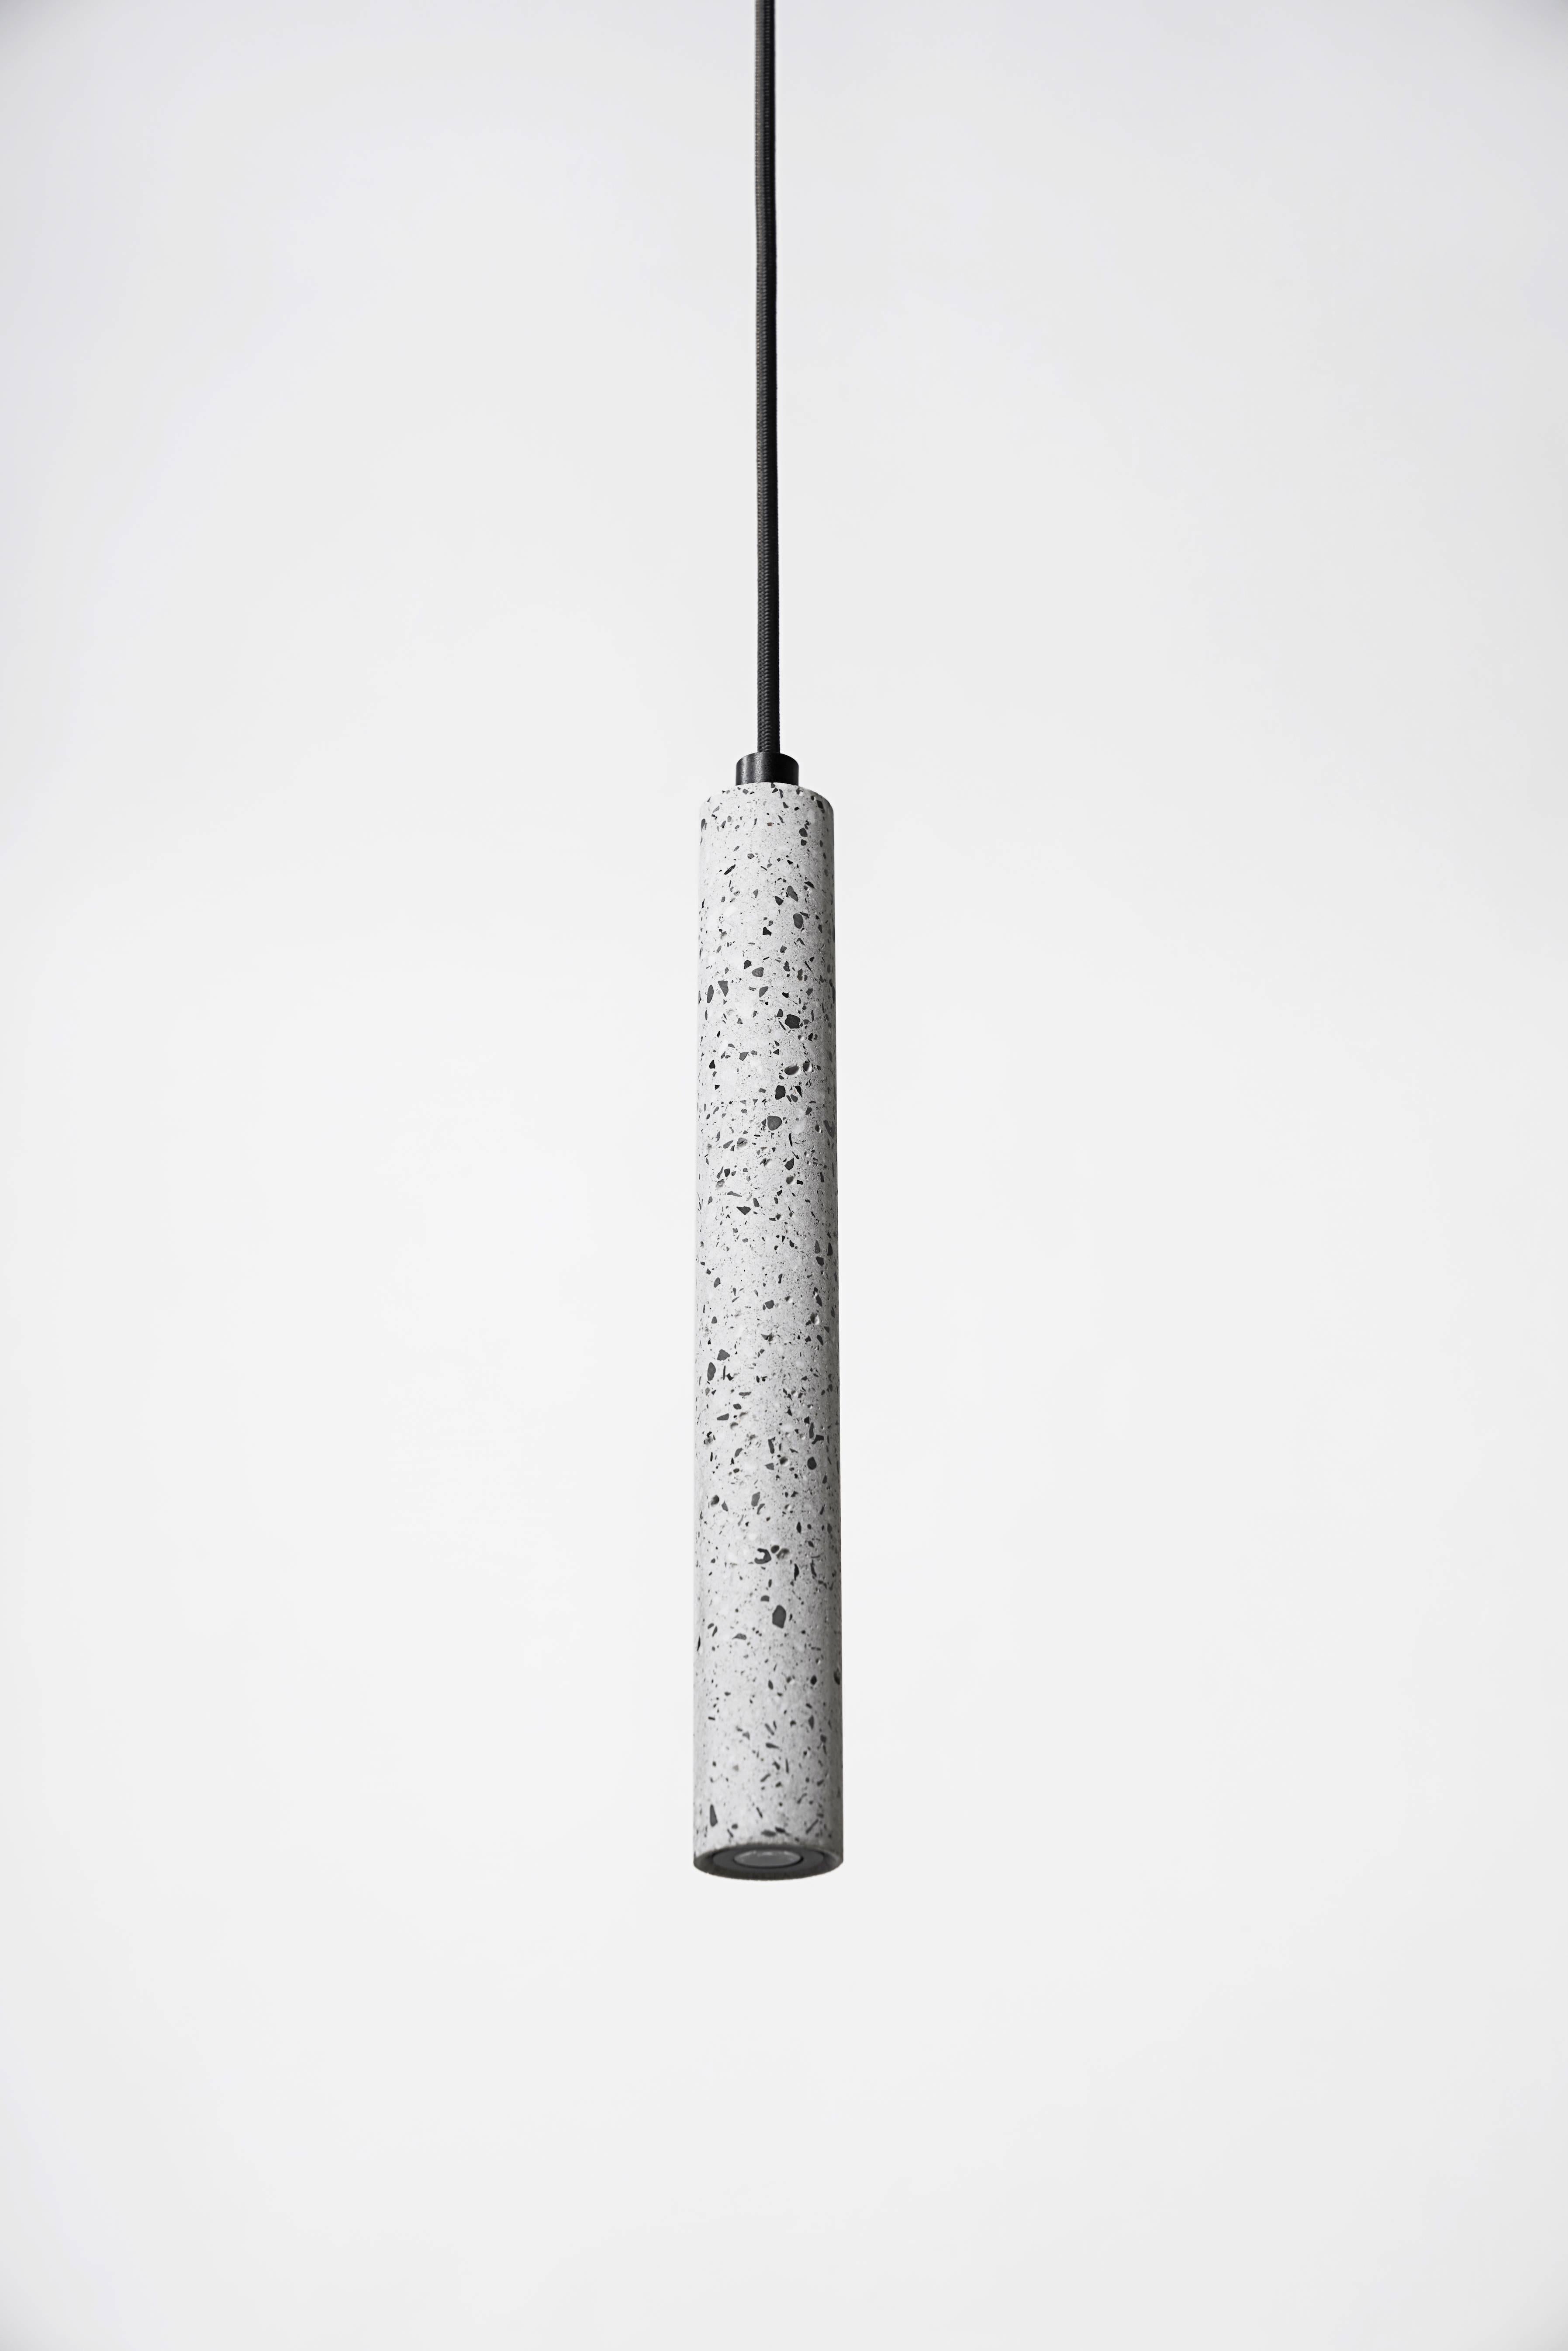 White terrazzo and concrete ceiling lamp designed by Cantonese studio Bentu Design.

(Sold individually)
 
Measures: 31 cm high; 4 cm diameter
Wire: 2 Meters black (adjustable)
Lamp type: G9 LED 1.5W.

Brass finish only.

“Bang” ceiling lamps are